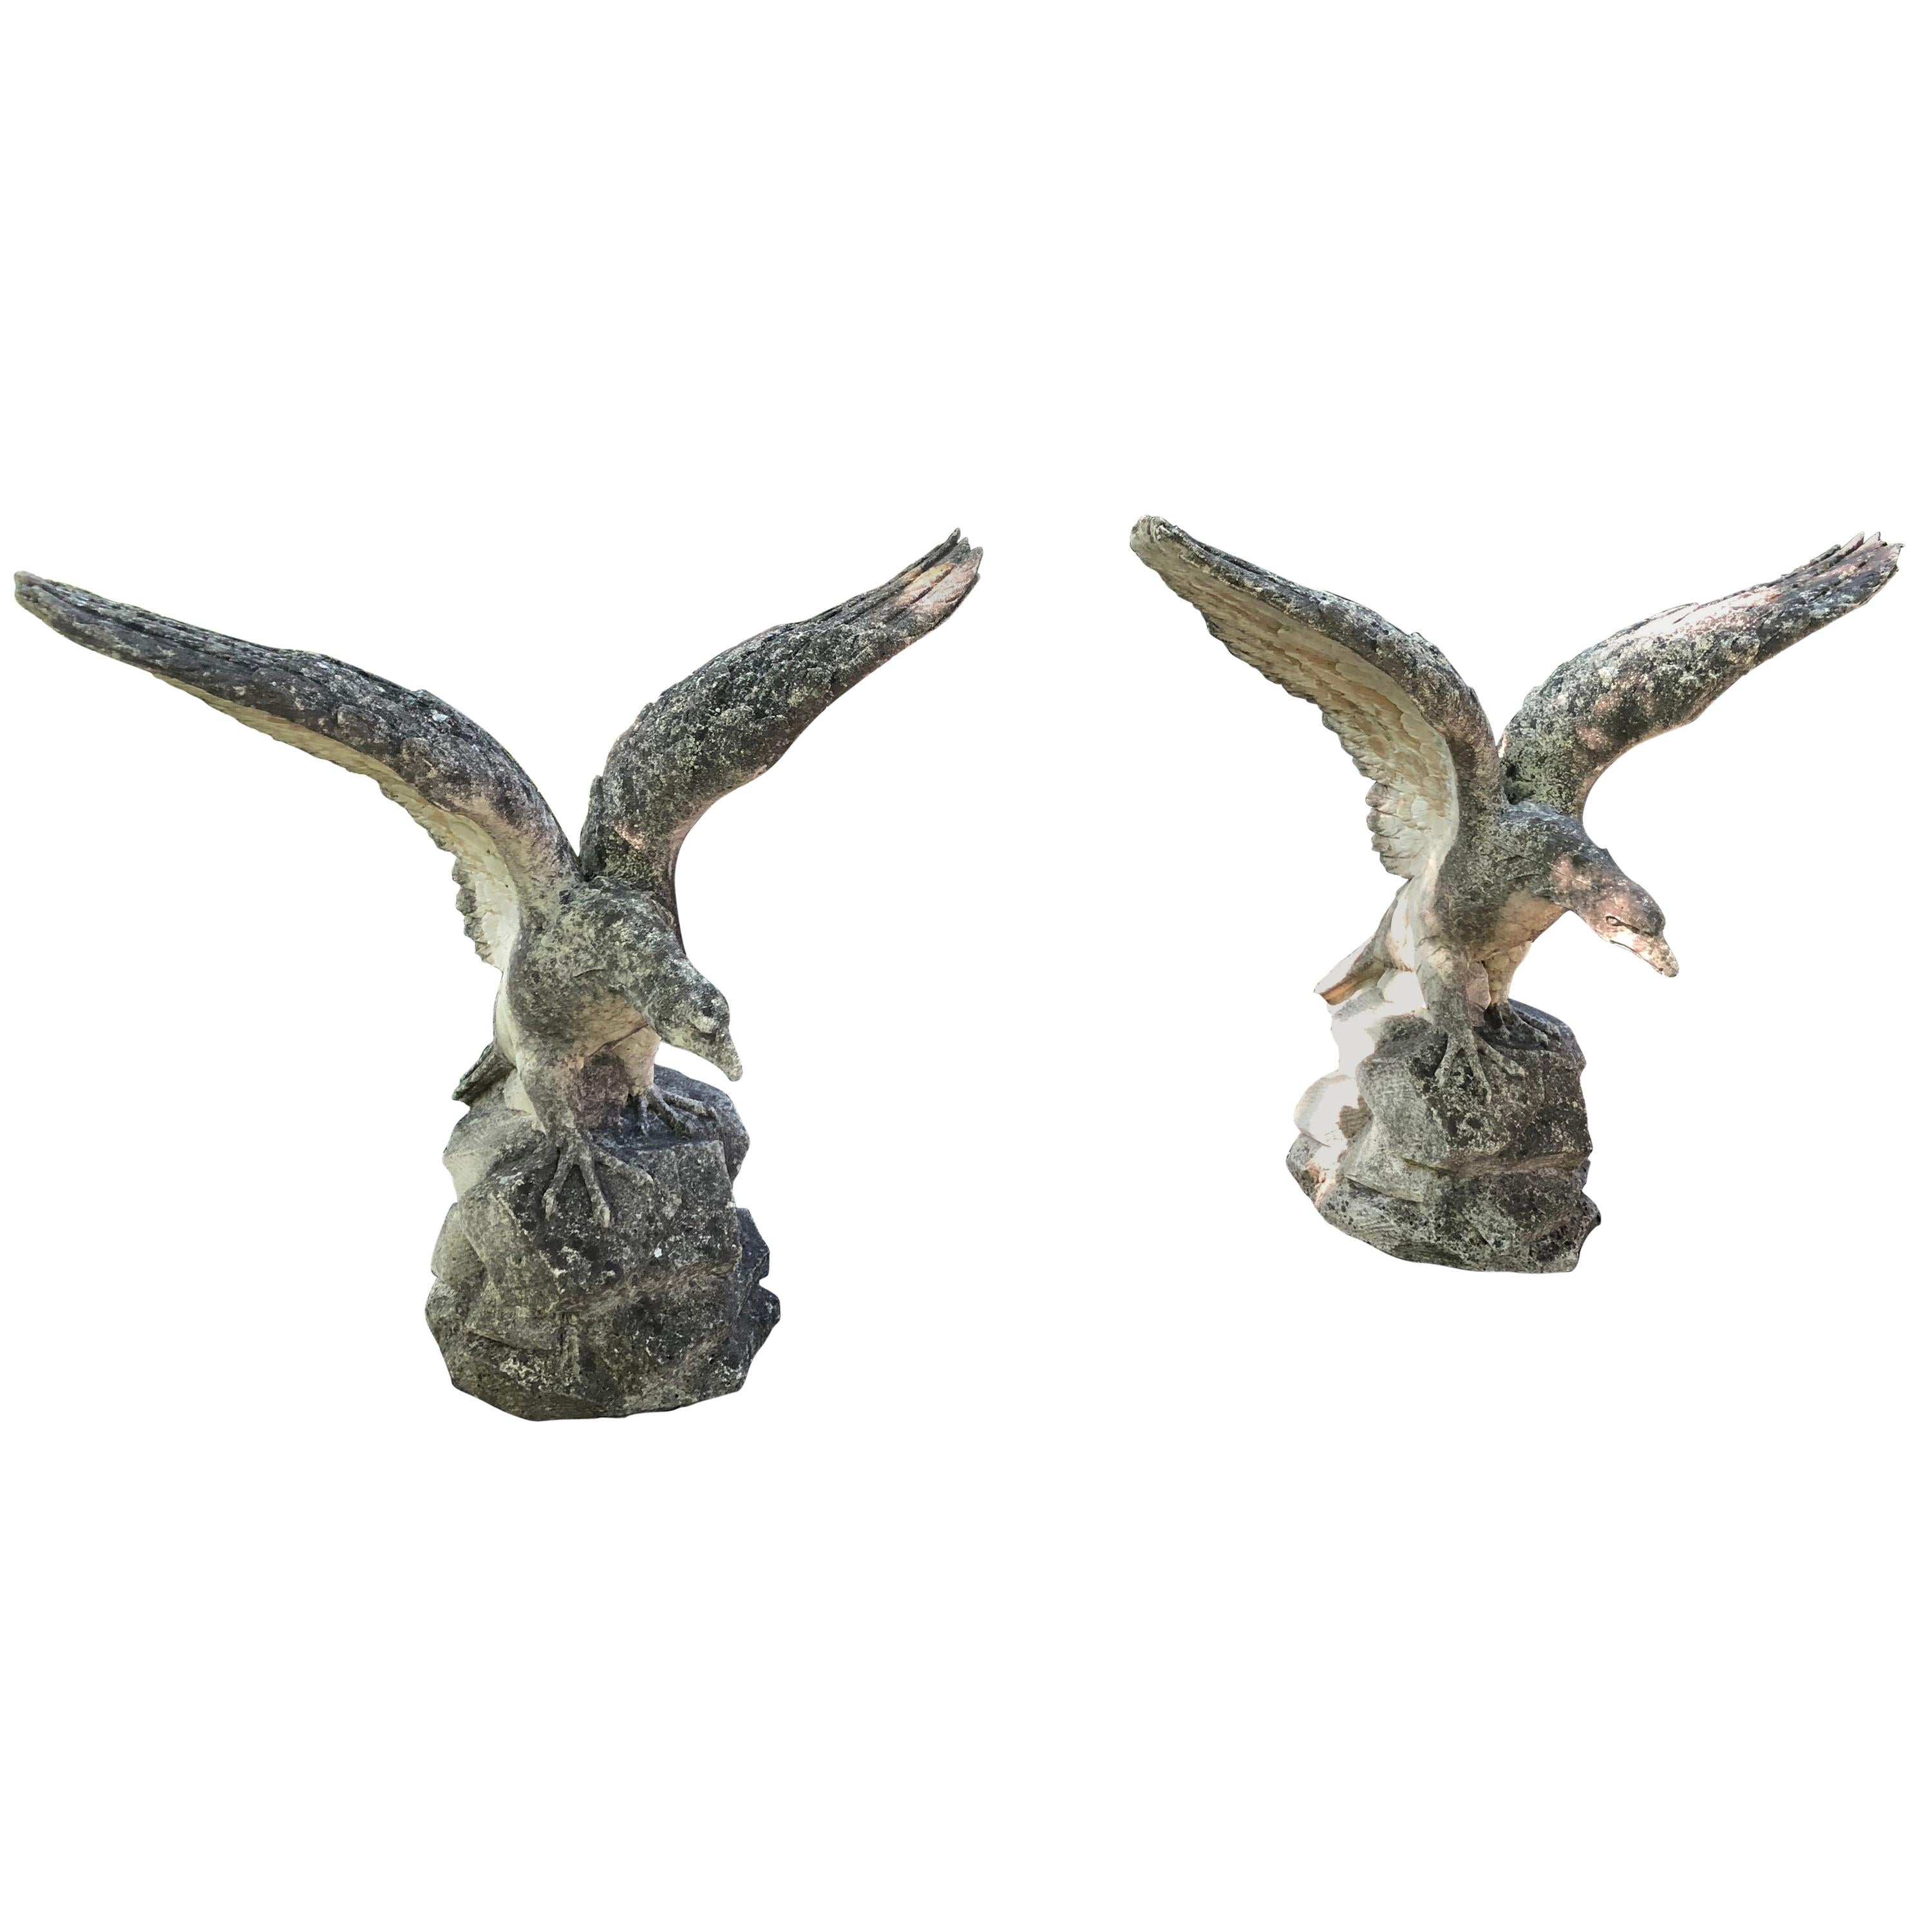 Pair of Life-Sized English Cast Stone Eagles with Outstretched Wings